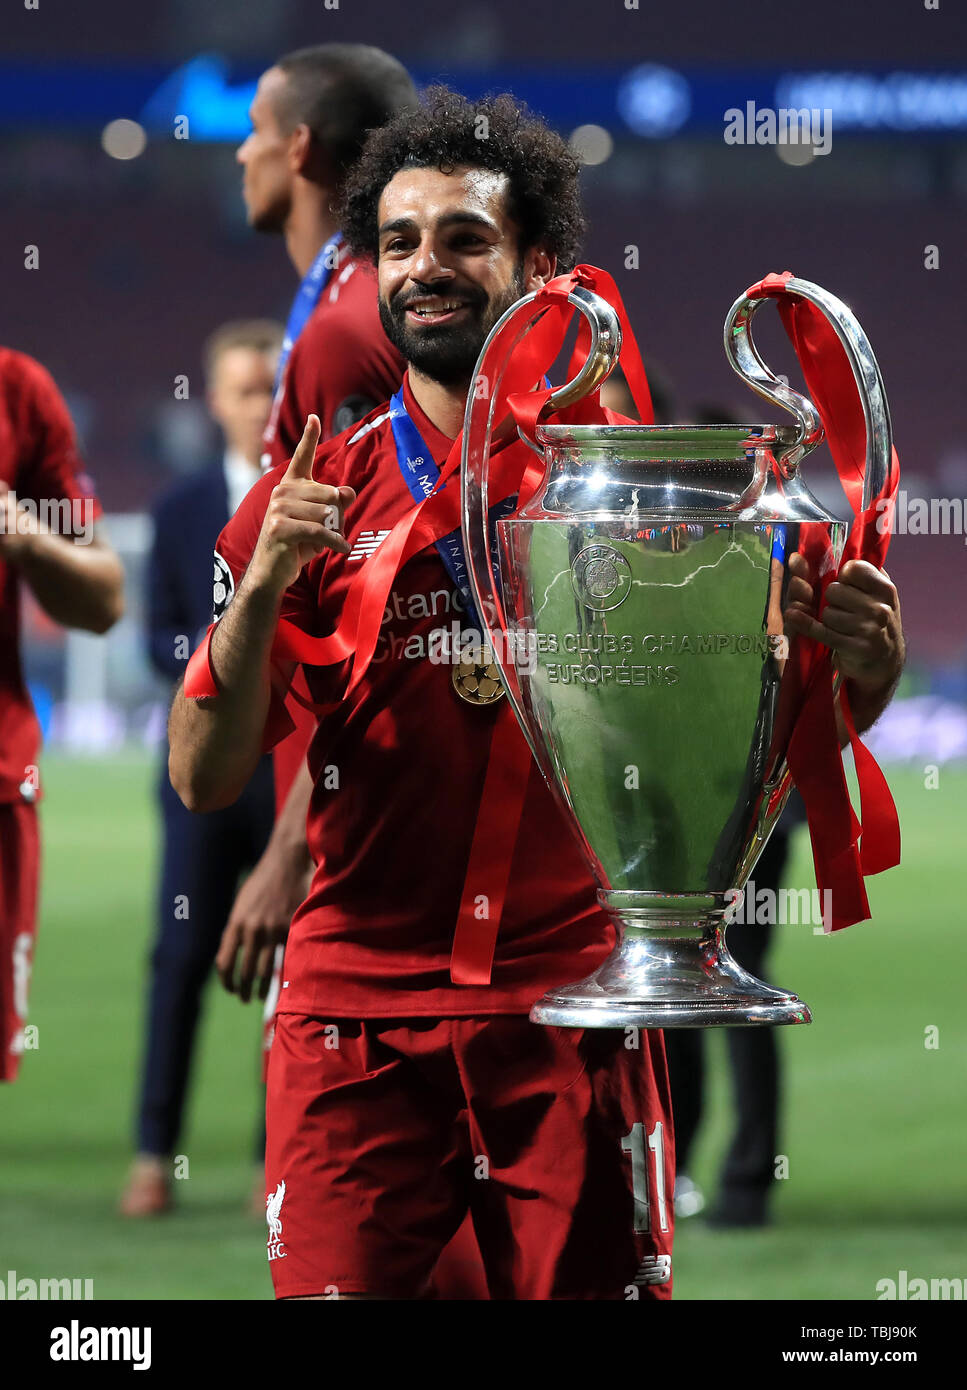 Liverpool's Mohamed Salah celebrates with the trophy after winning the